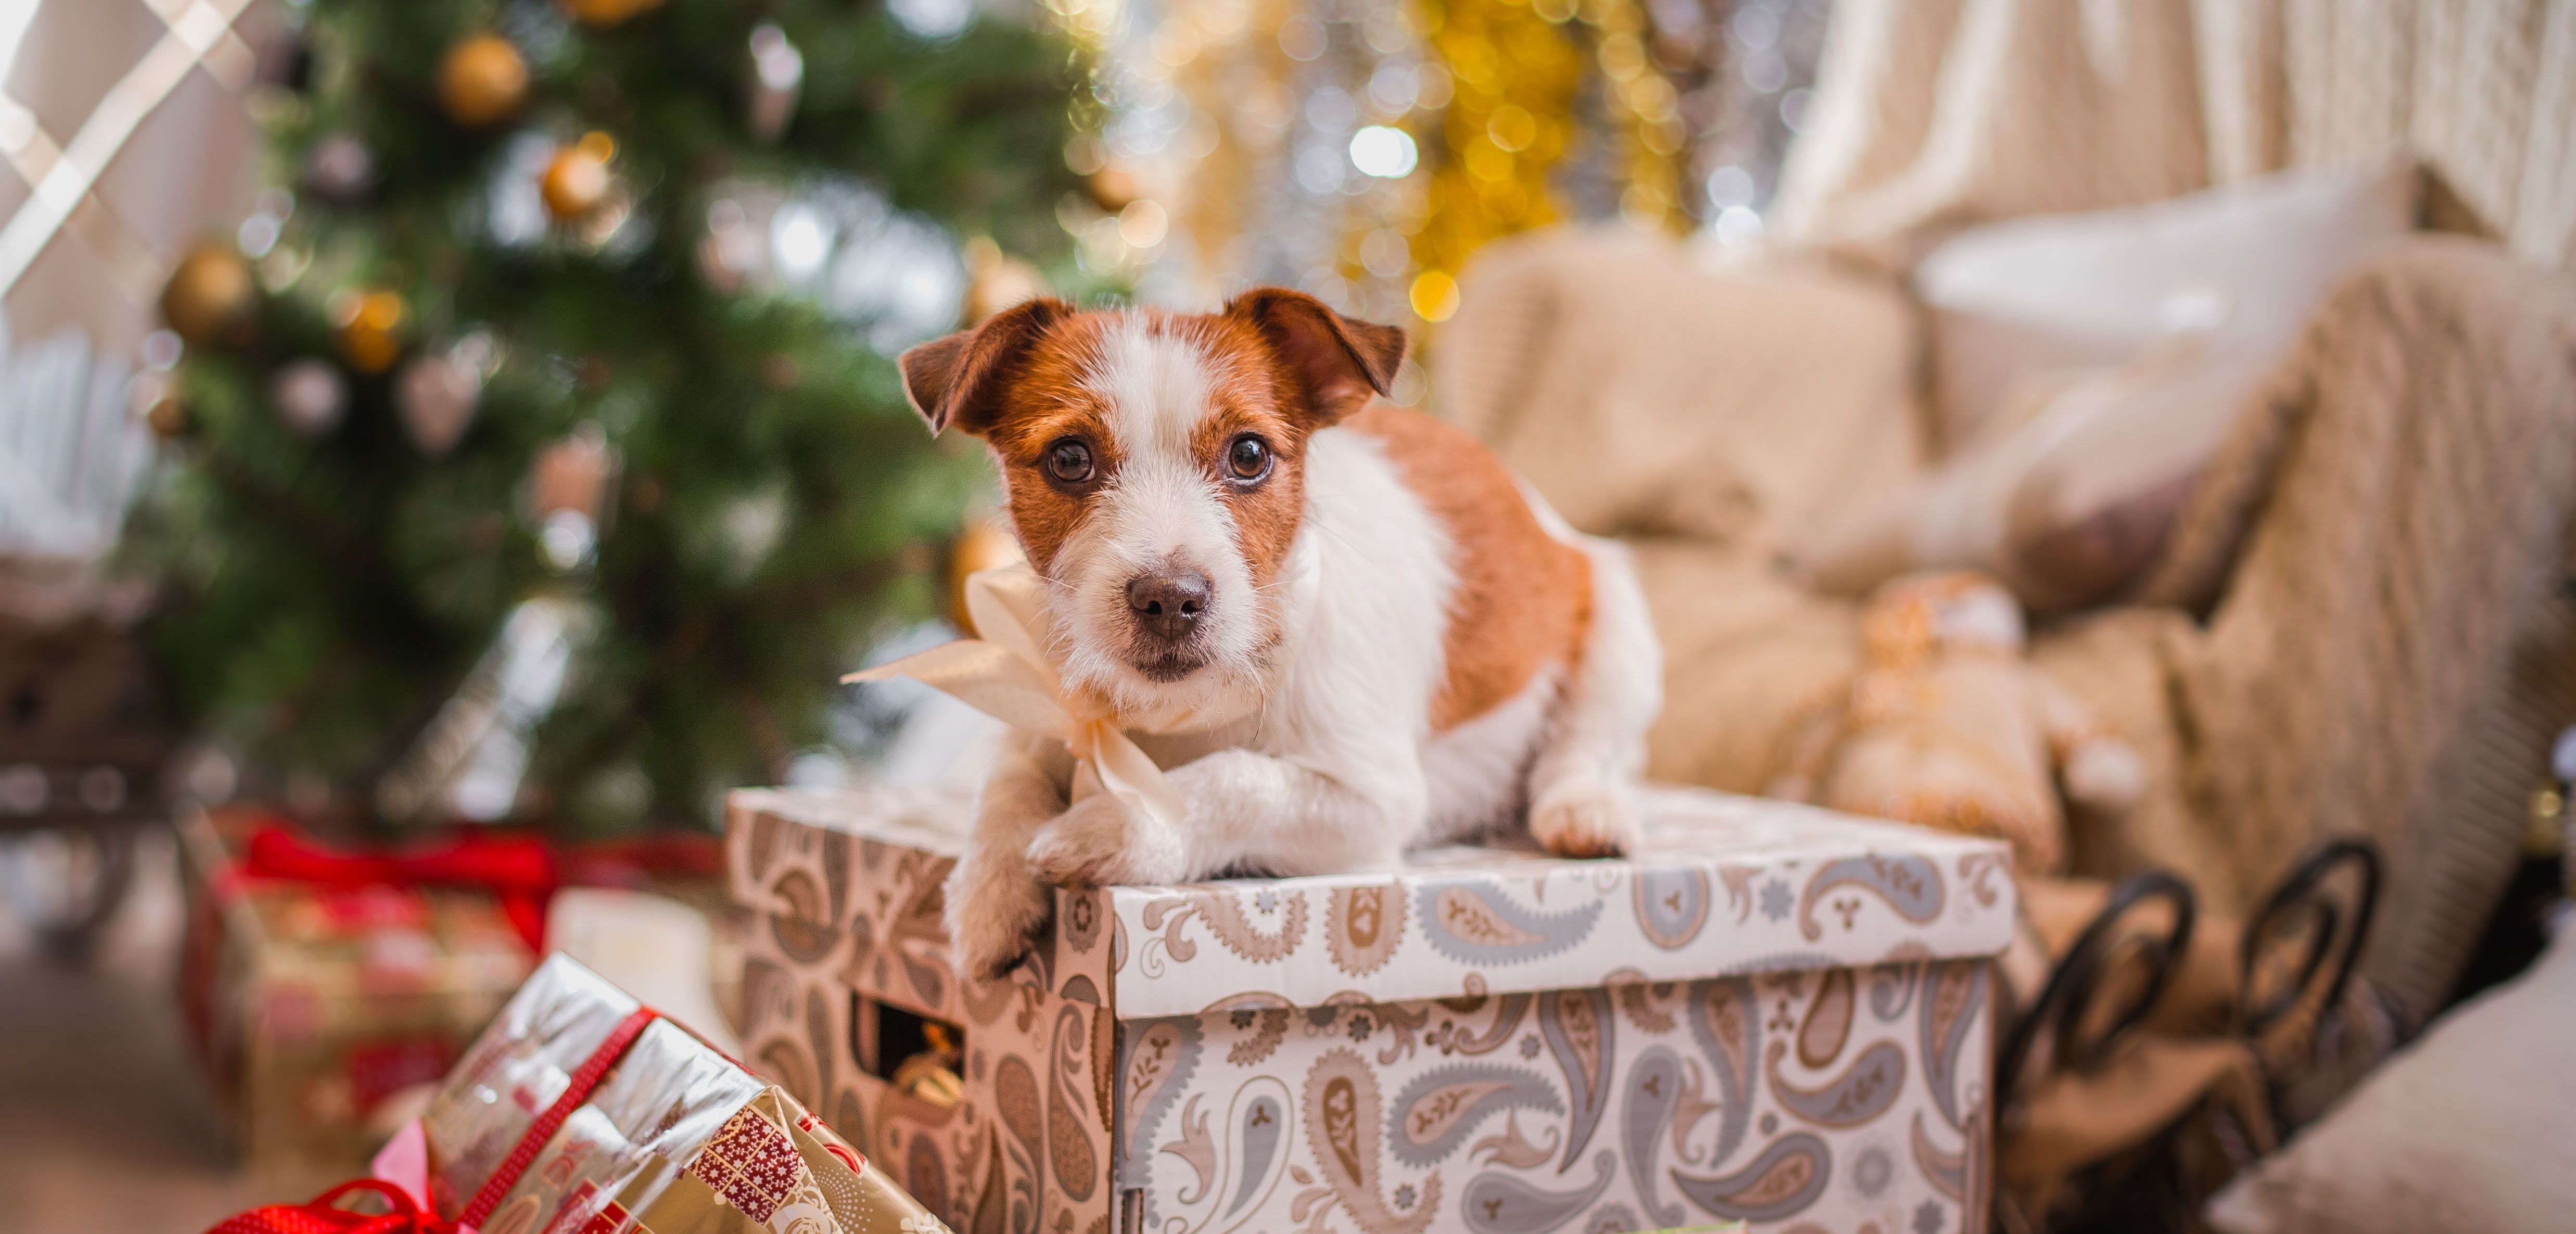 Send some Holiday Cheer to Homeless Pets in Need